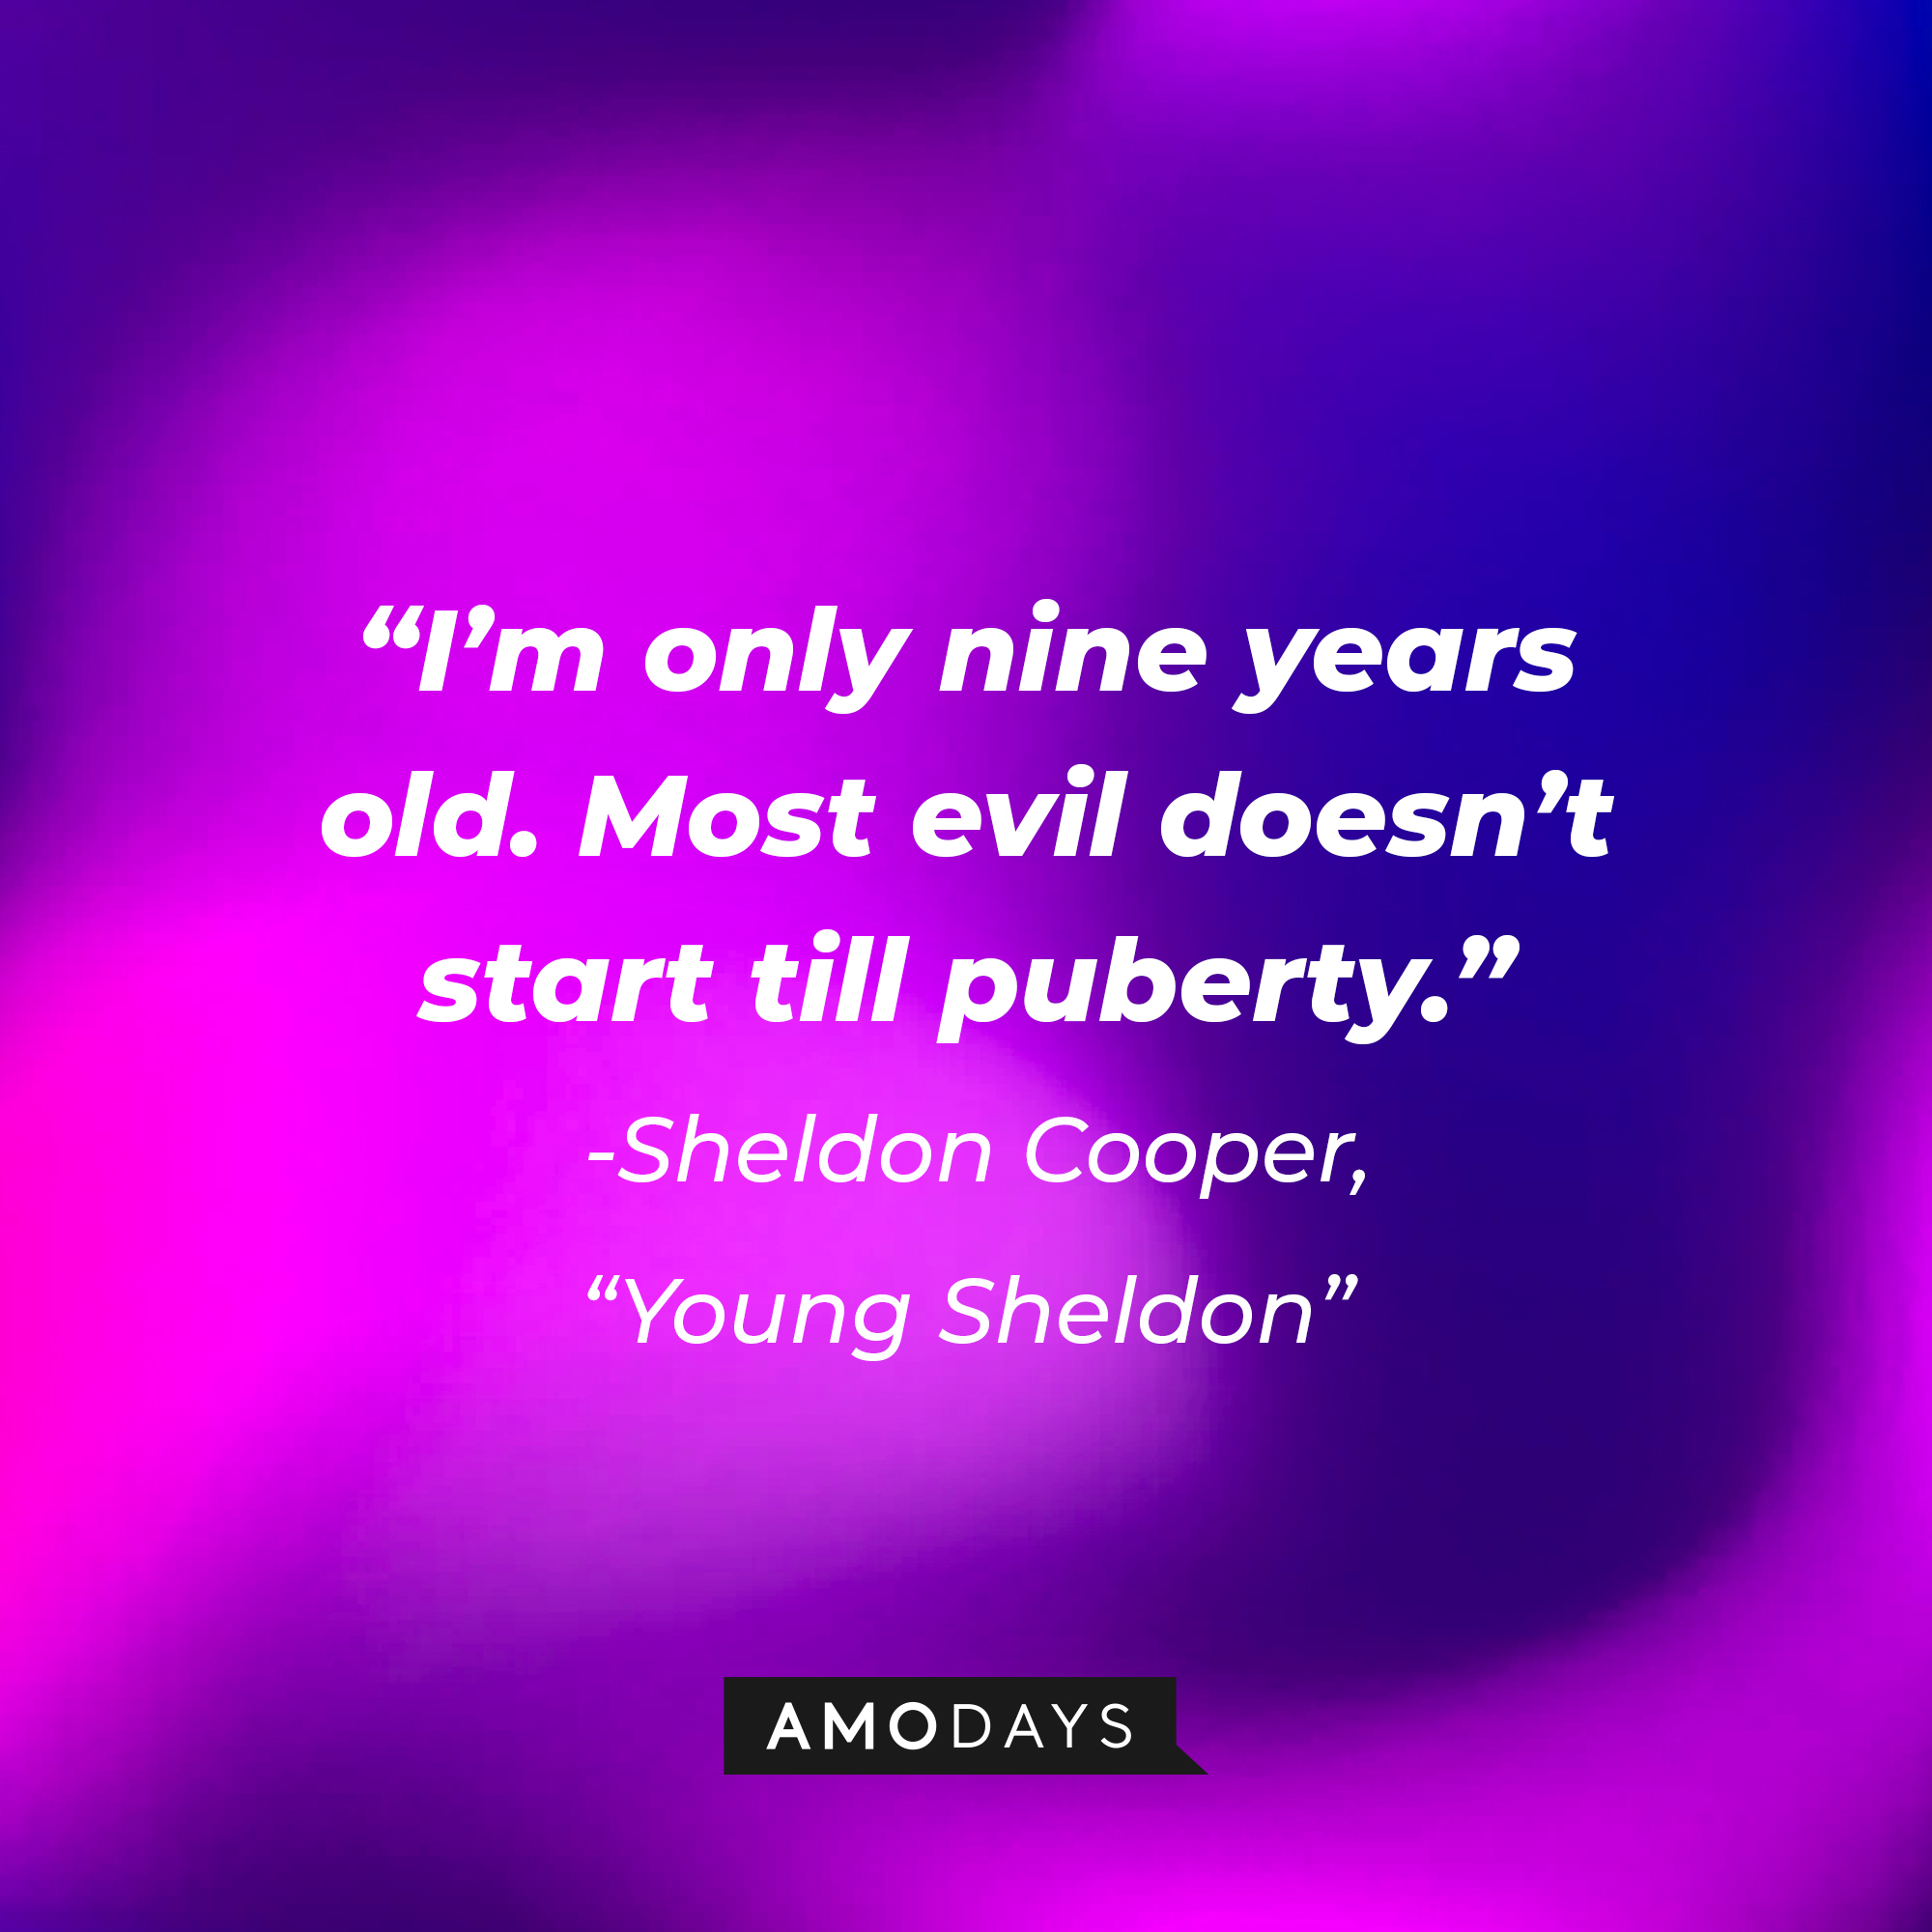 Sheldon Cooper's quote from "Young Sheldon": “I’m only nine years old. Most evil doesn’t start till puberty.” | Source: Amodays